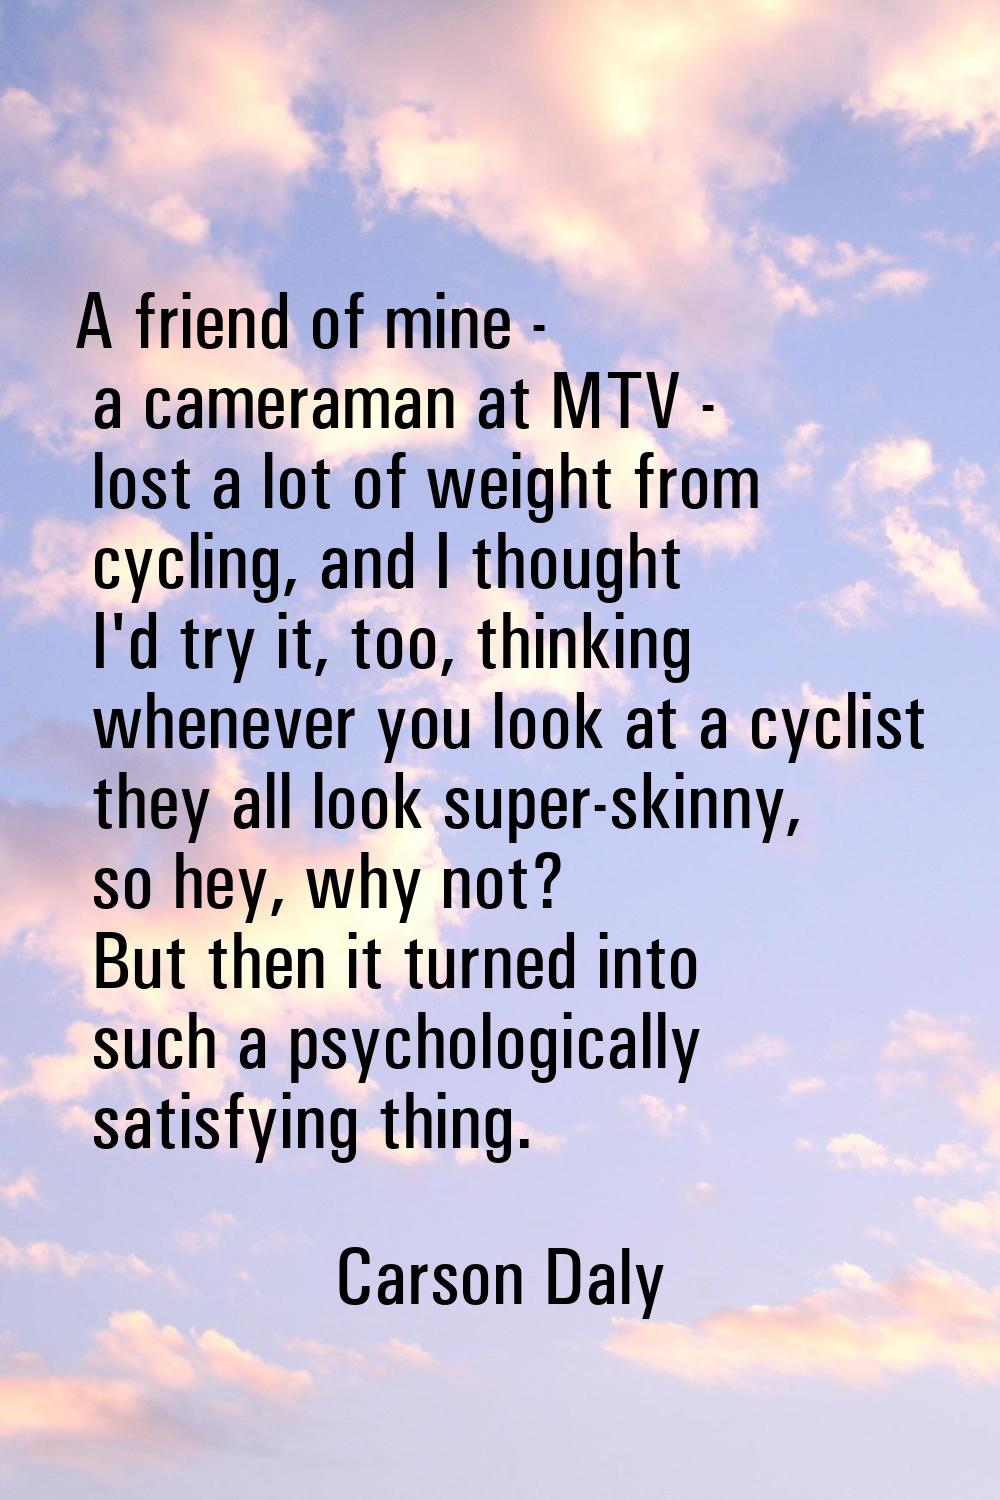 A friend of mine - a cameraman at MTV - lost a lot of weight from cycling, and I thought I'd try it